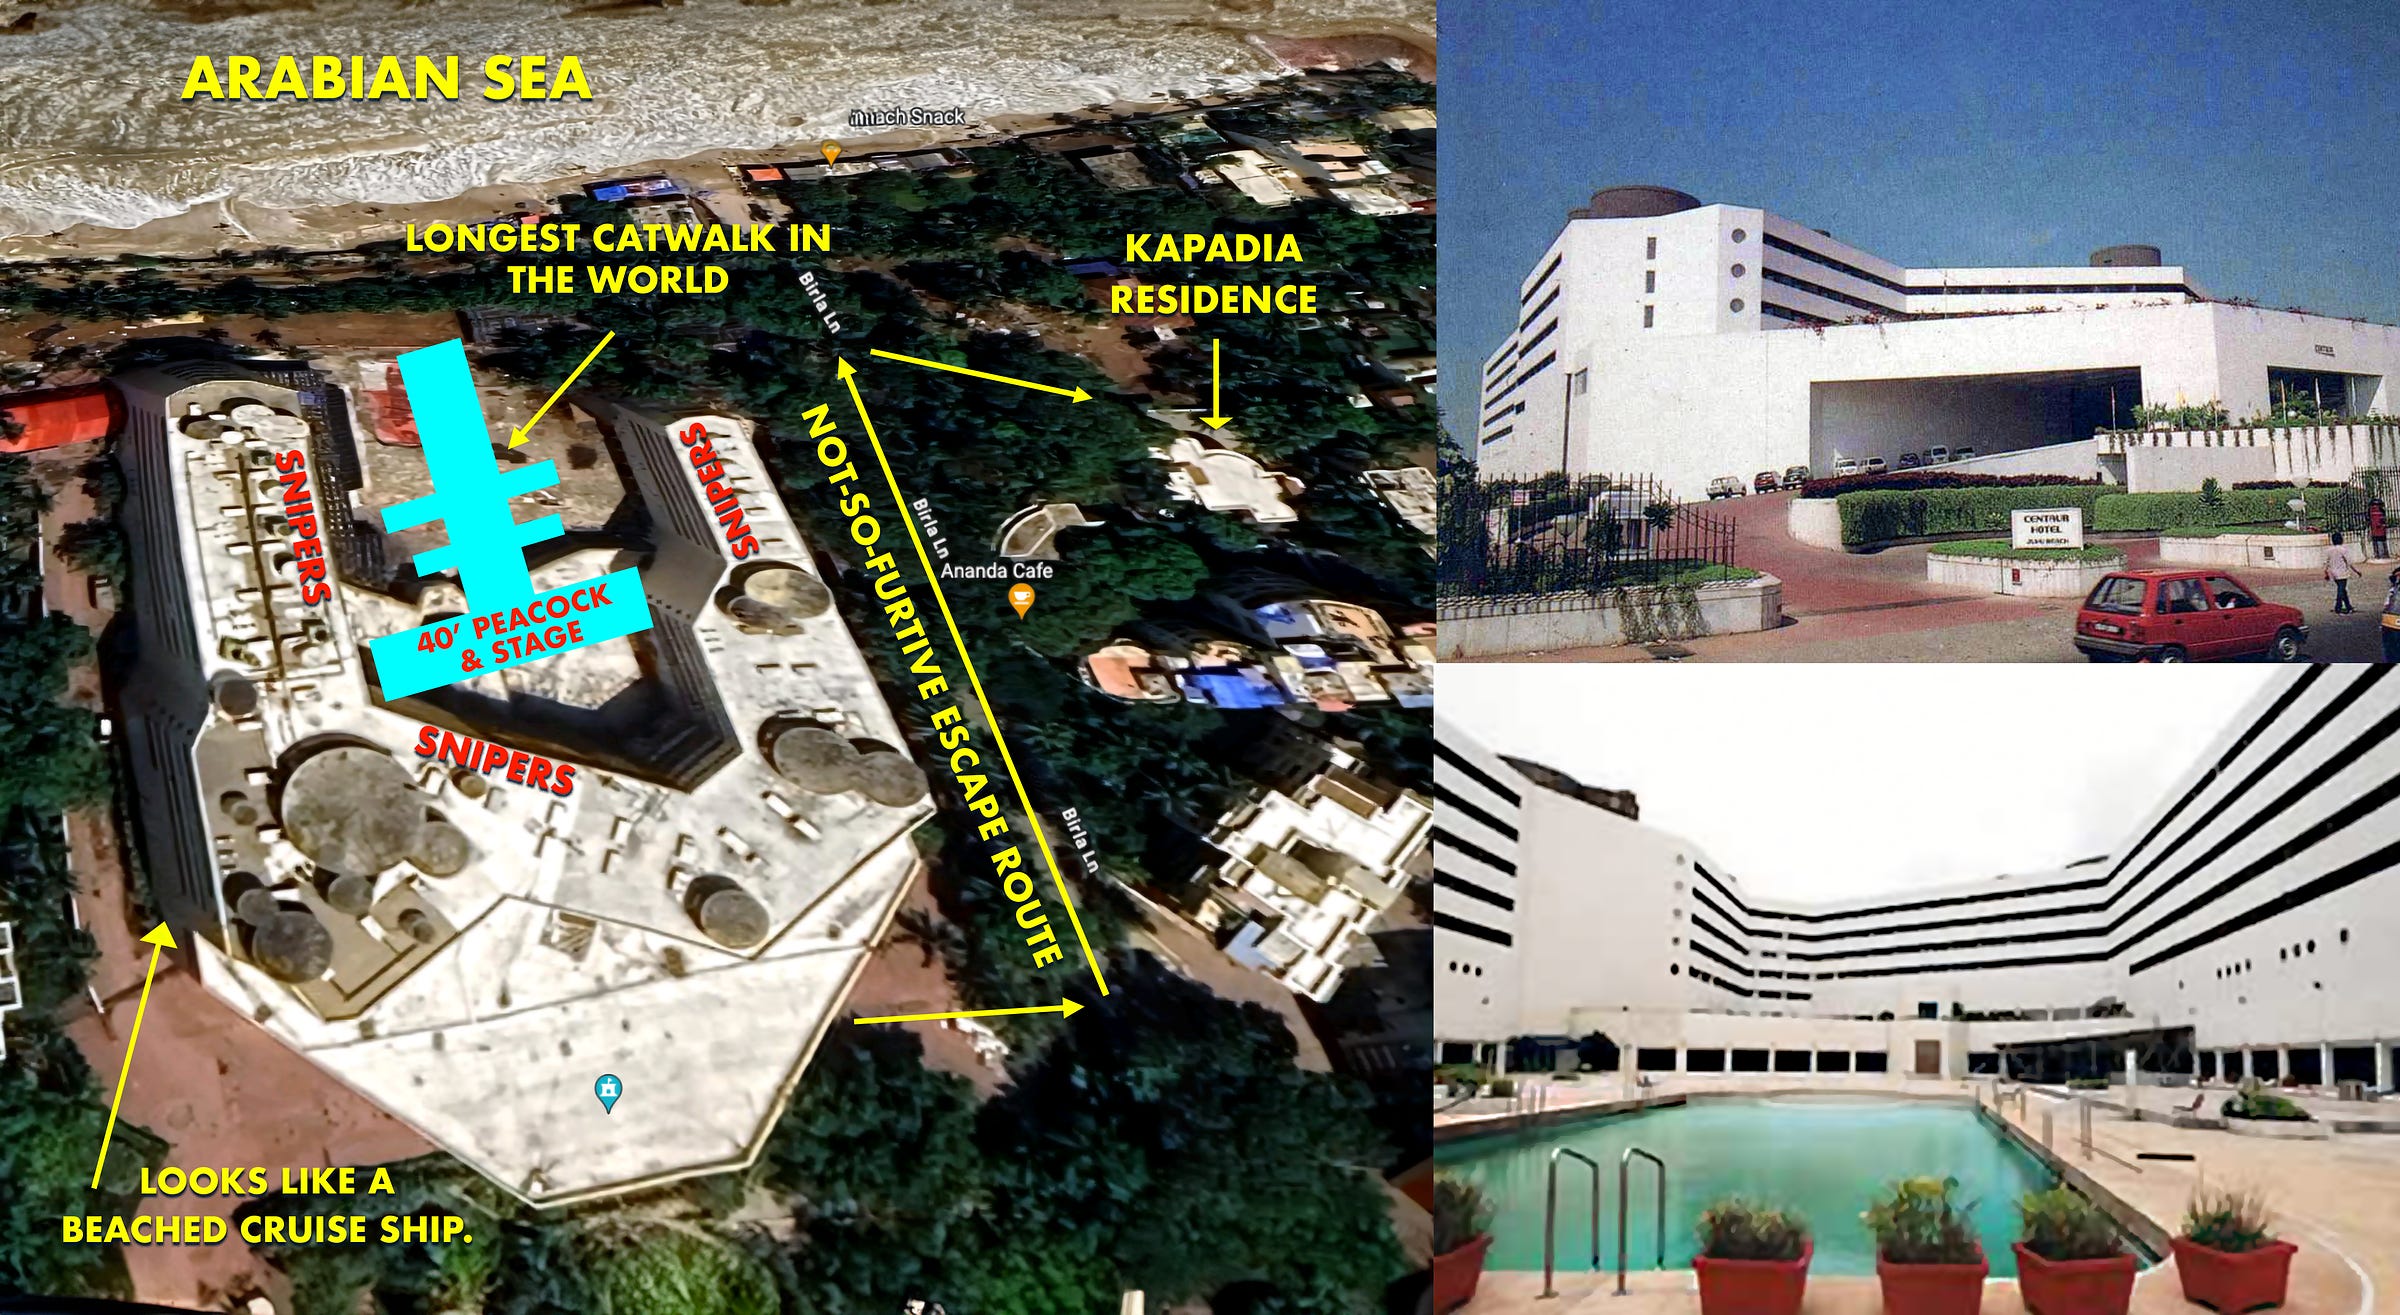 Juhu Centaur Hotel with layout of the 1993 Miss India pageant